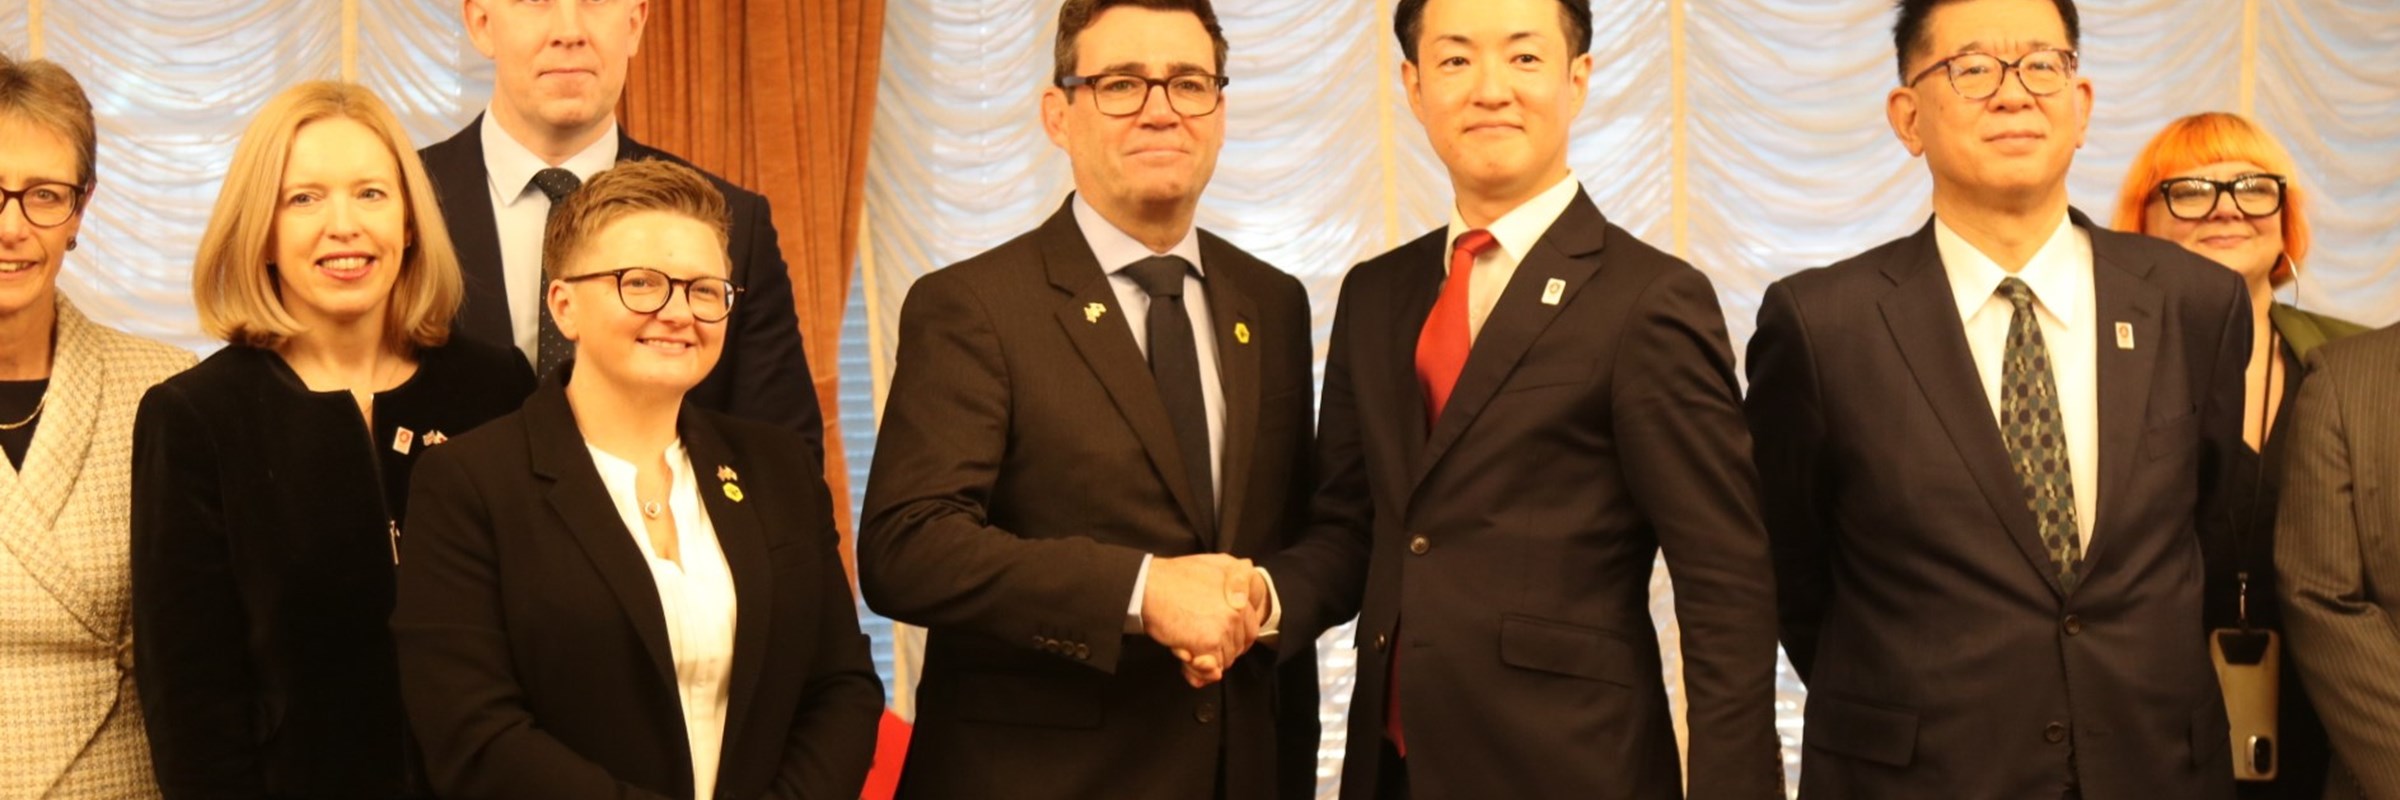 Andy Burnham and Mayor Hideyuki Yokoyama stand side-by-side, shaking hands, flanked by other members of the Greater Manchester delegation